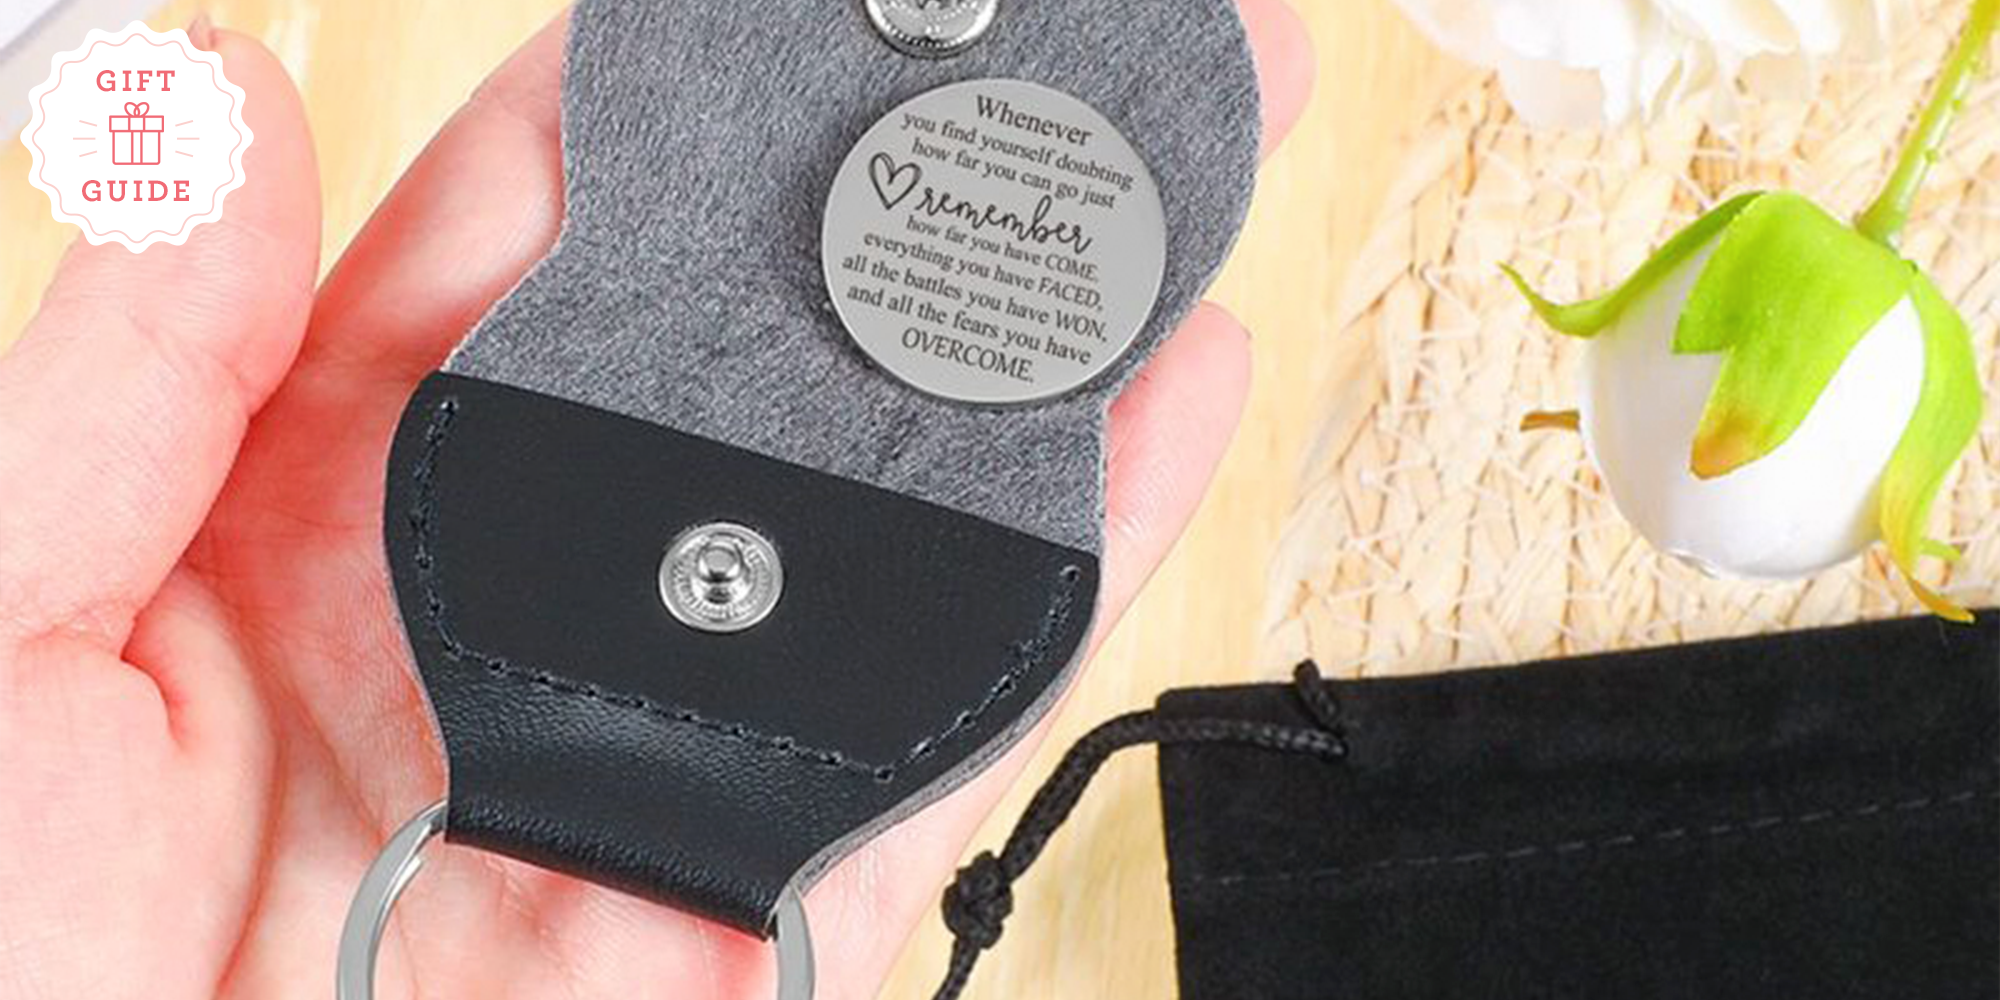 20 thoughtful gifts that will make someone's life easier